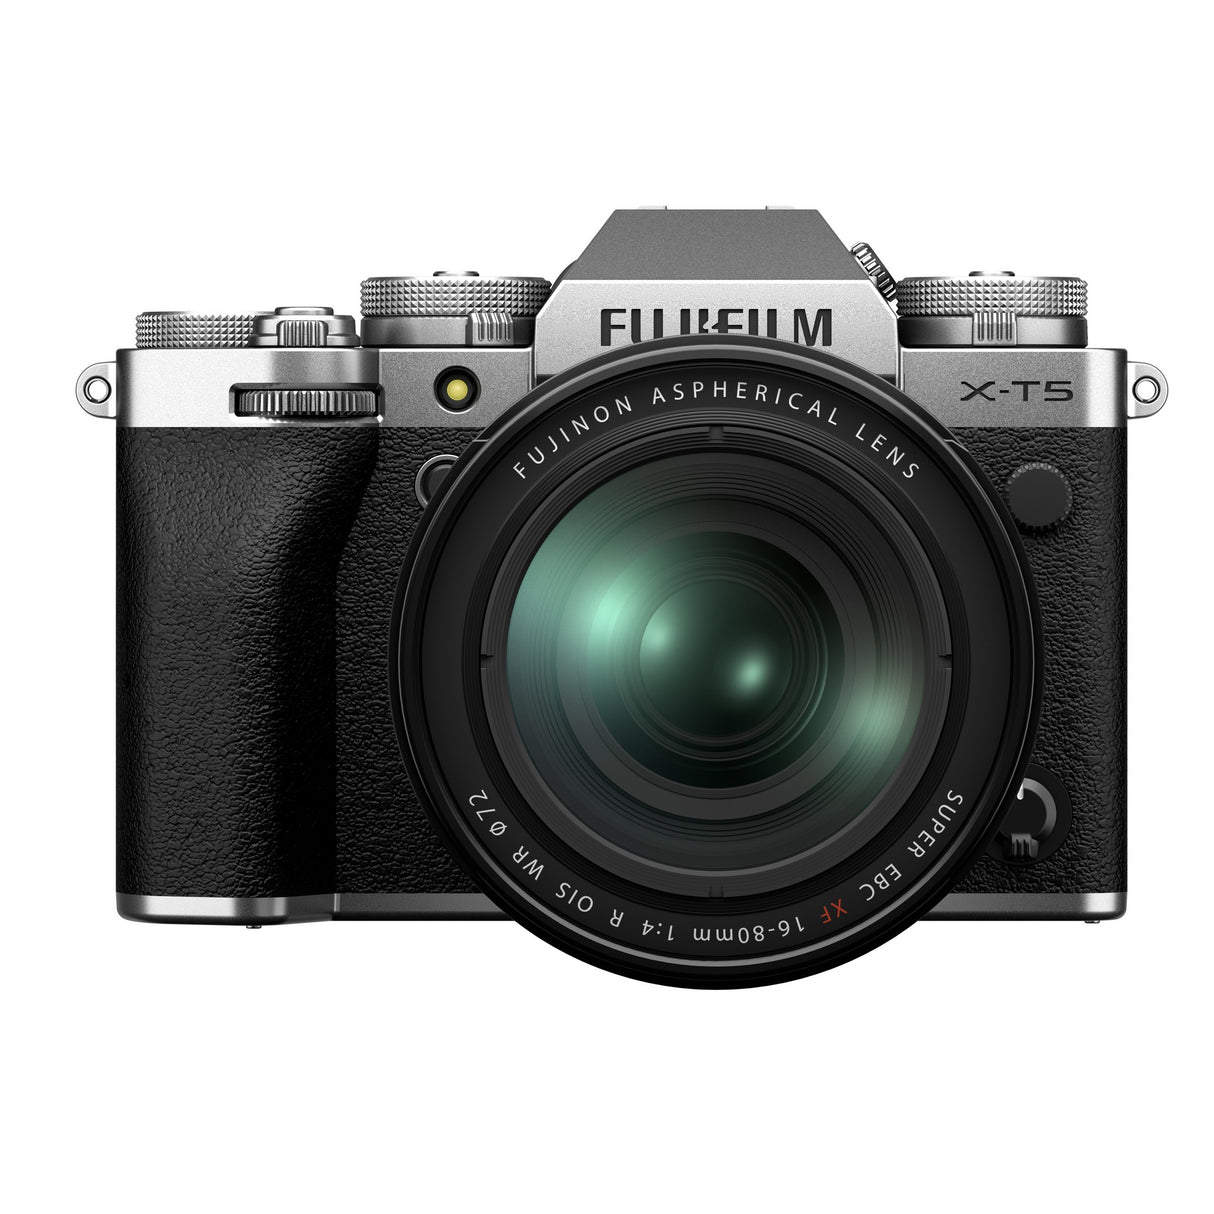 Fujifilm X-T5 Mirrorless Camera with 16-80mm Lens, Silver